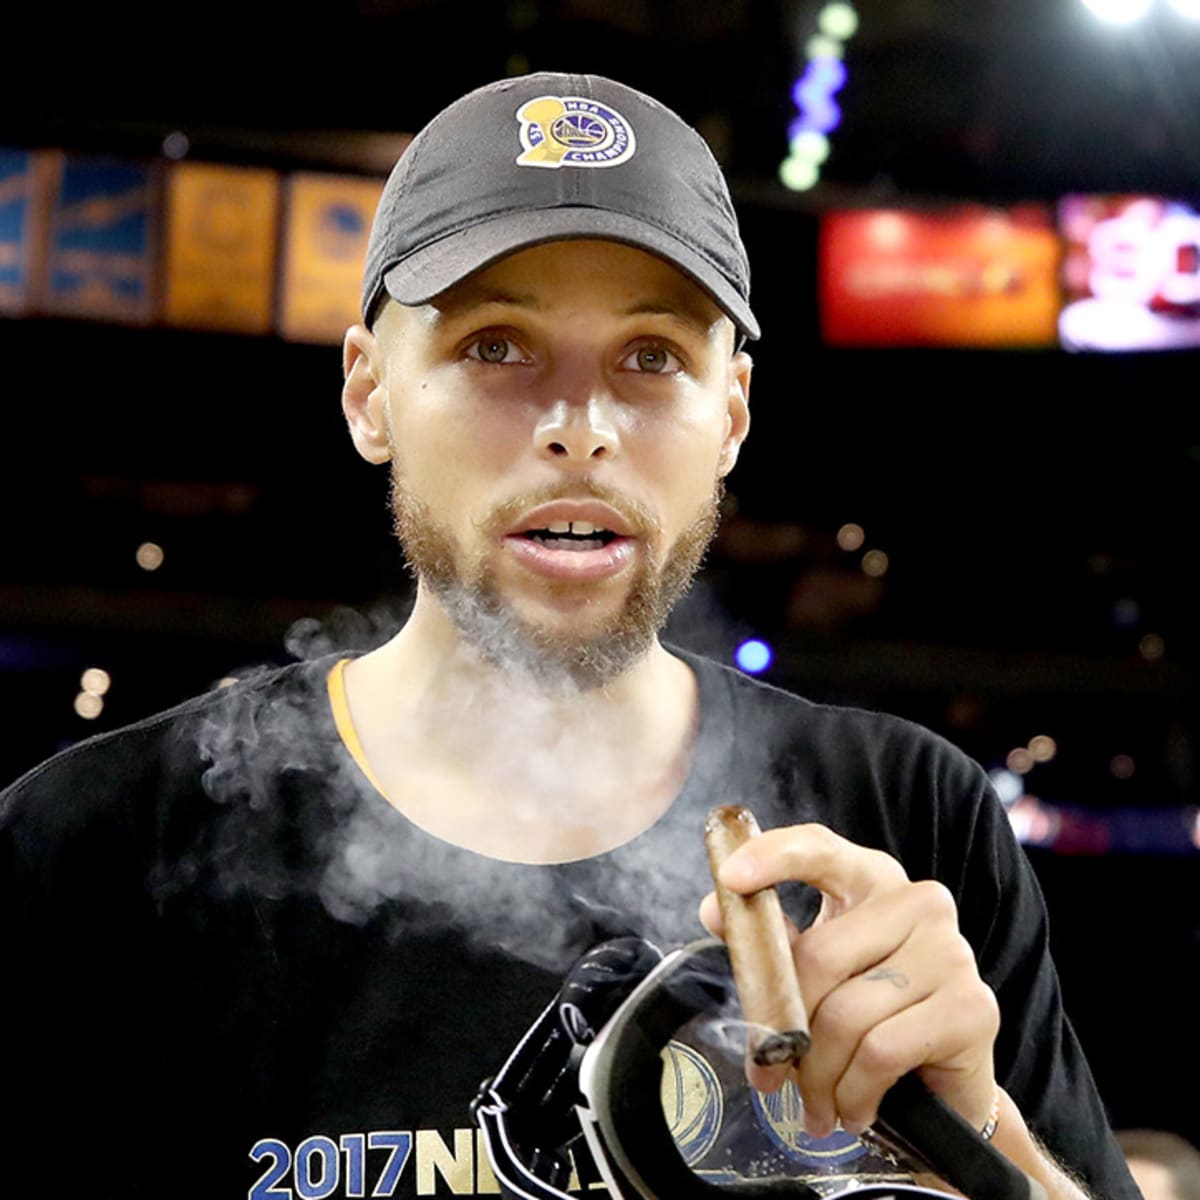 NBA Finals 2017: Watch as Steph Curry Sparks Up A Cigar During